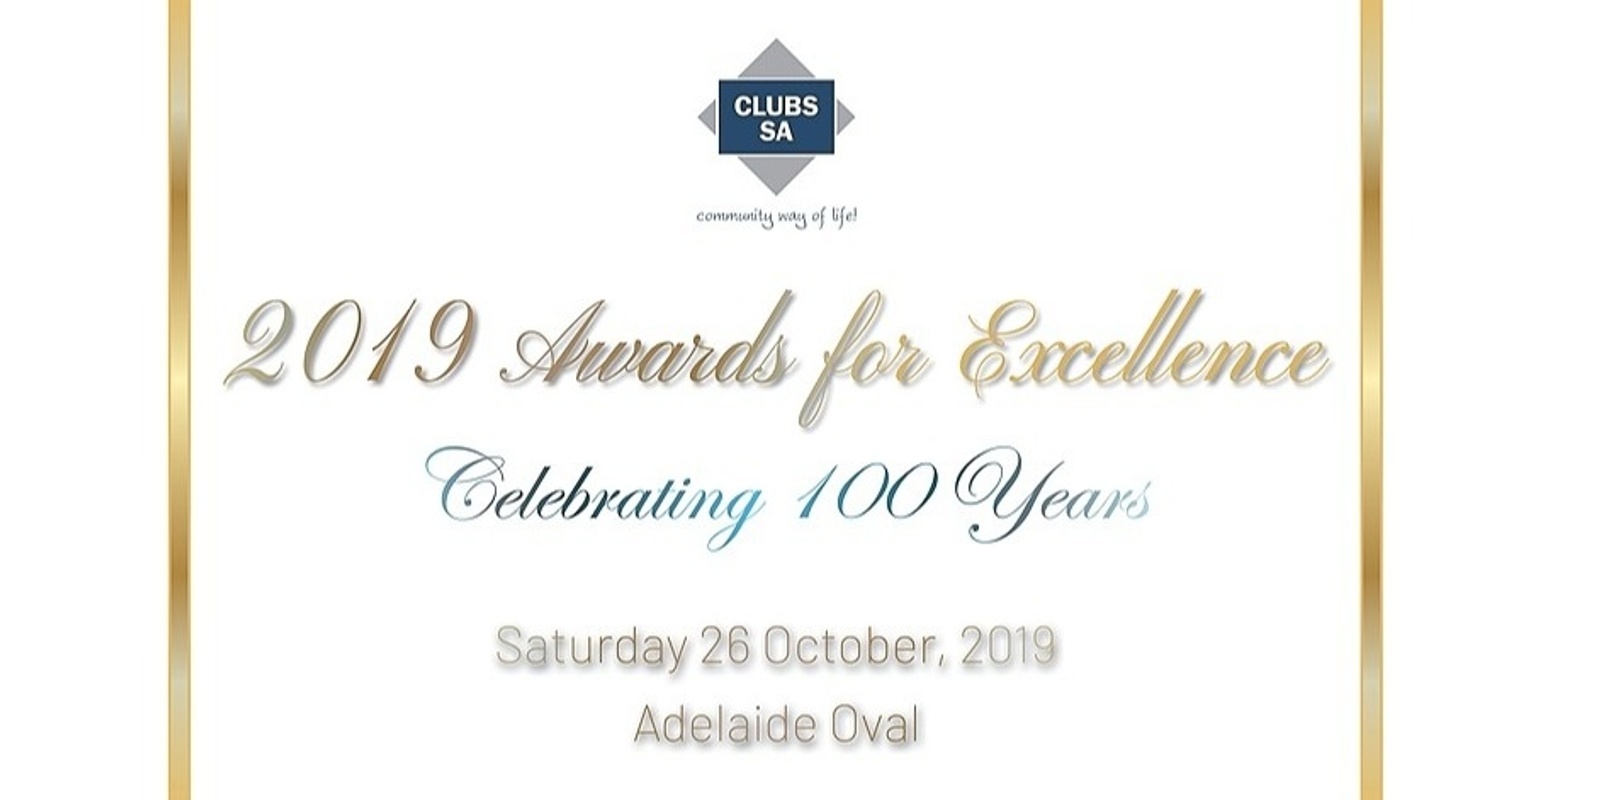 Banner image for Clubs SA 2019 Awards for Excellence - 100th Anniversary Celebration